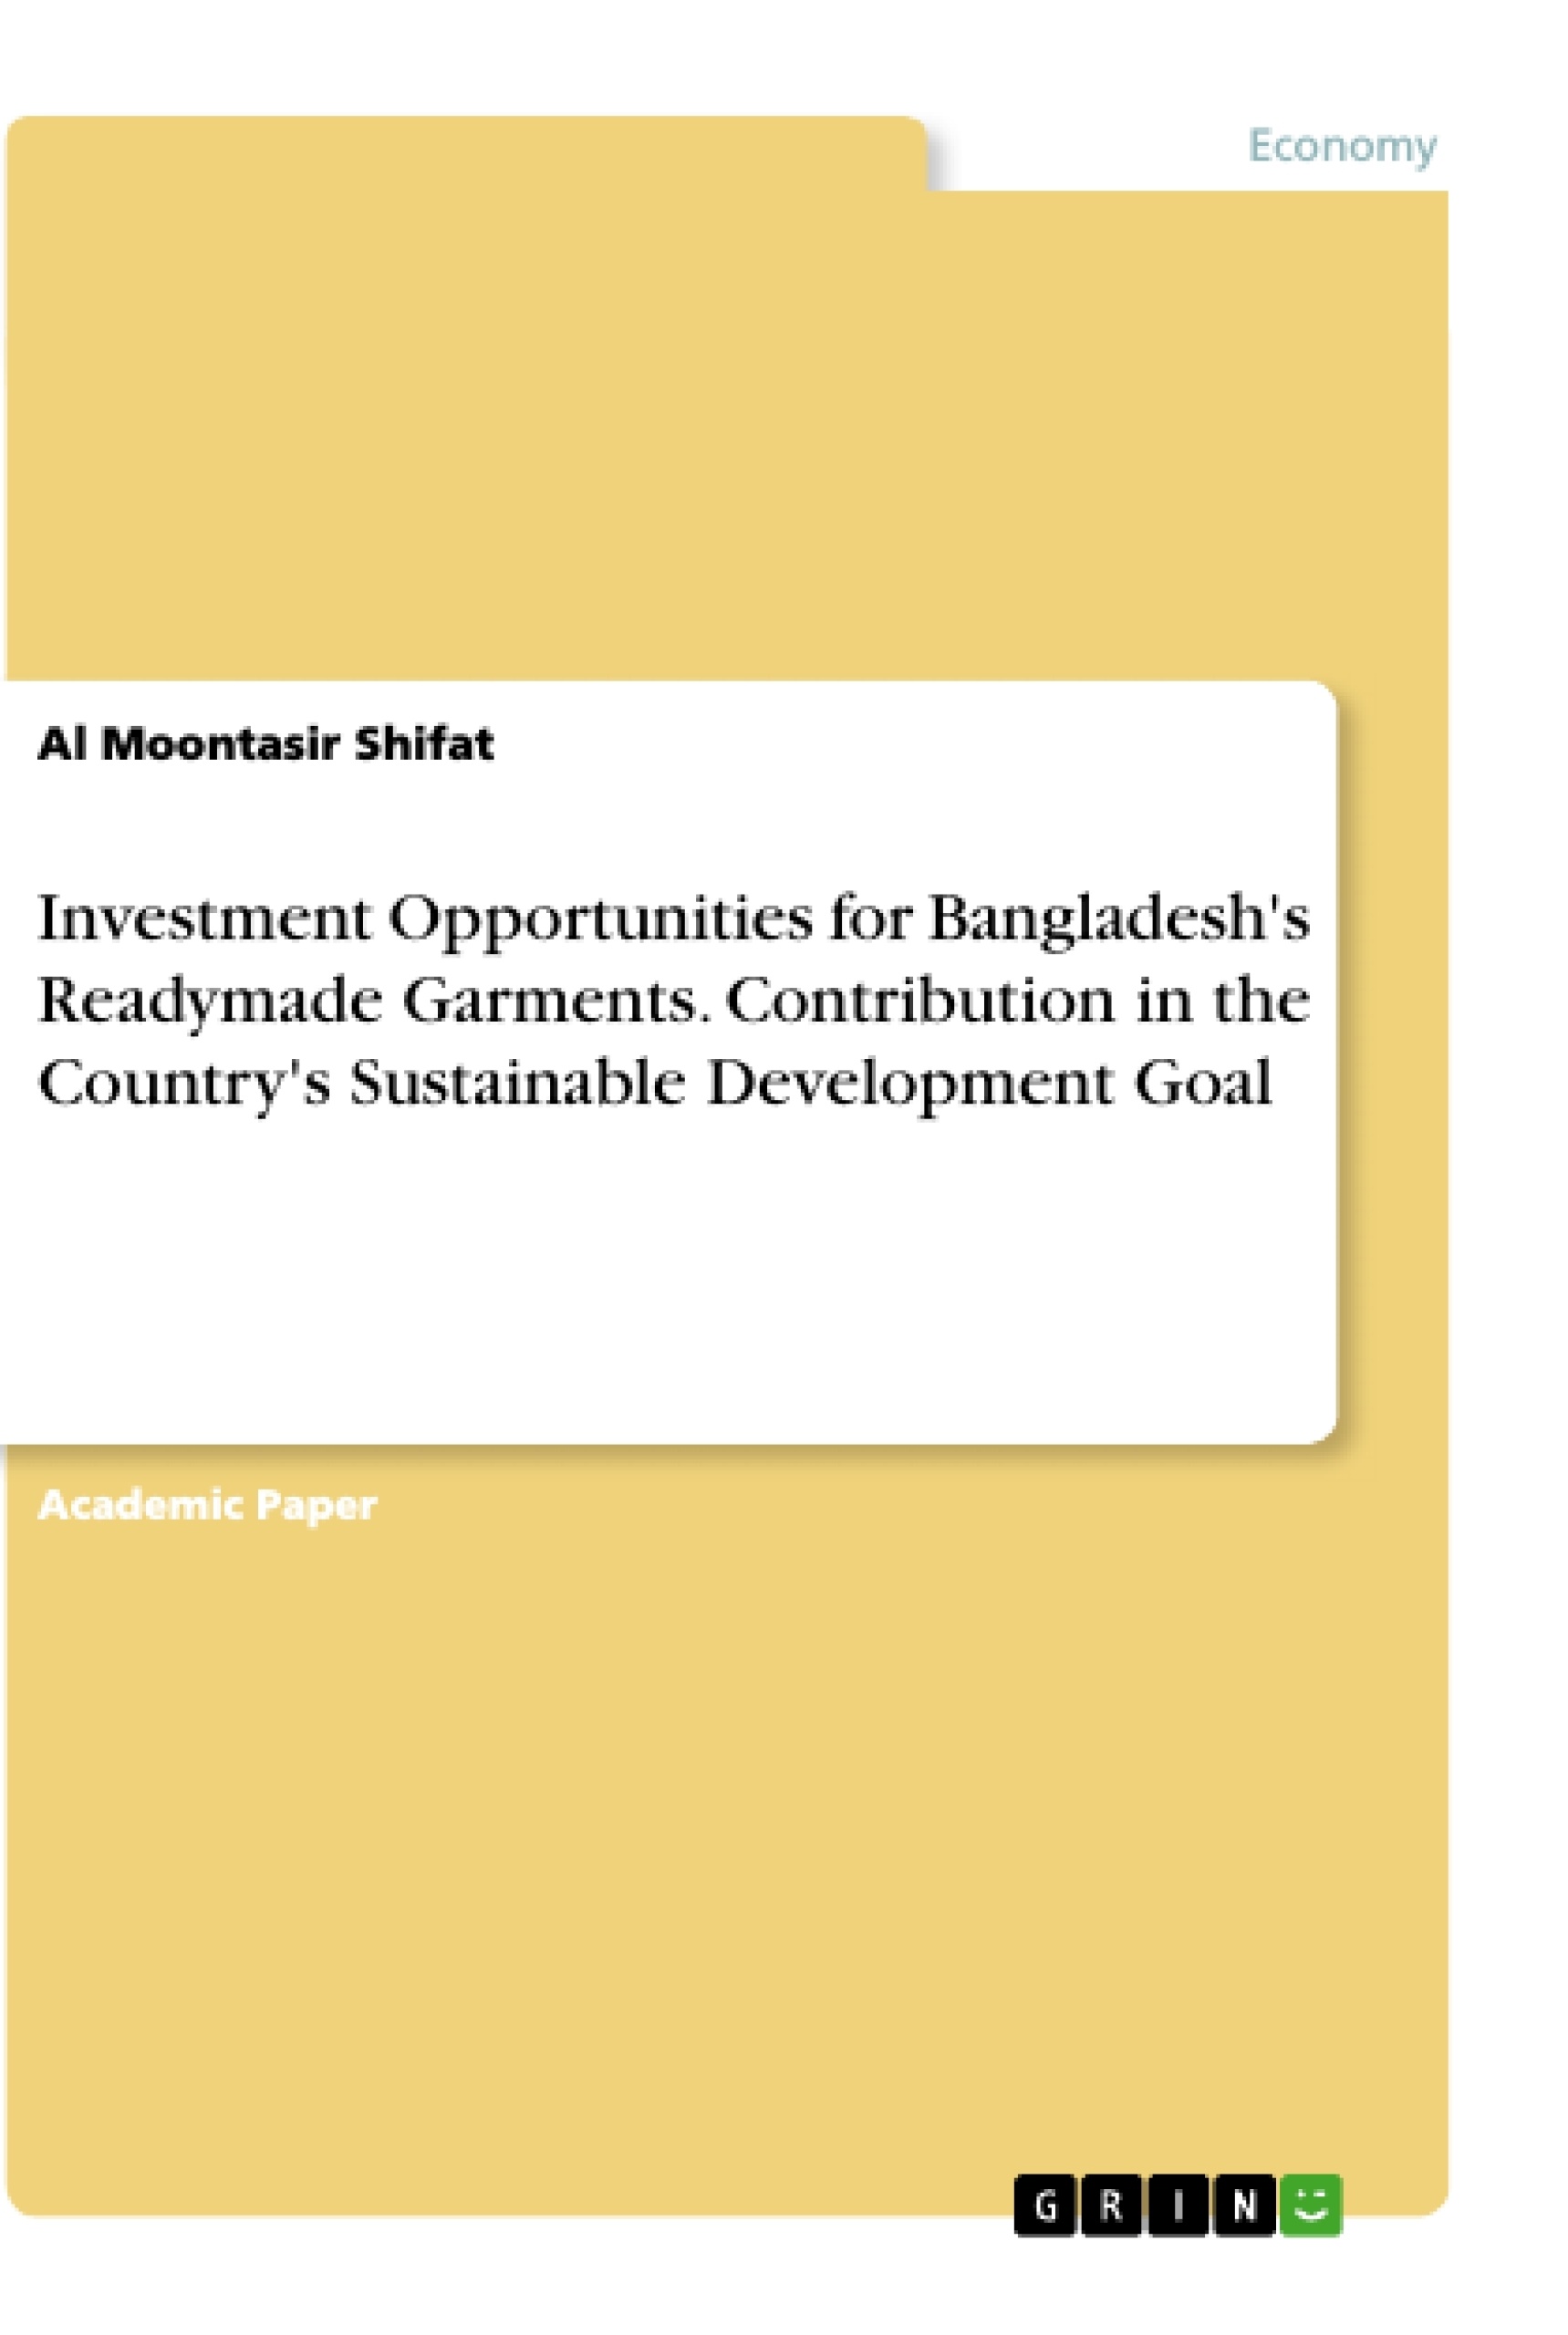 Title: Investment Opportunities for Bangladesh's Readymade Garments. Contribution in the Country's Sustainable Development Goal